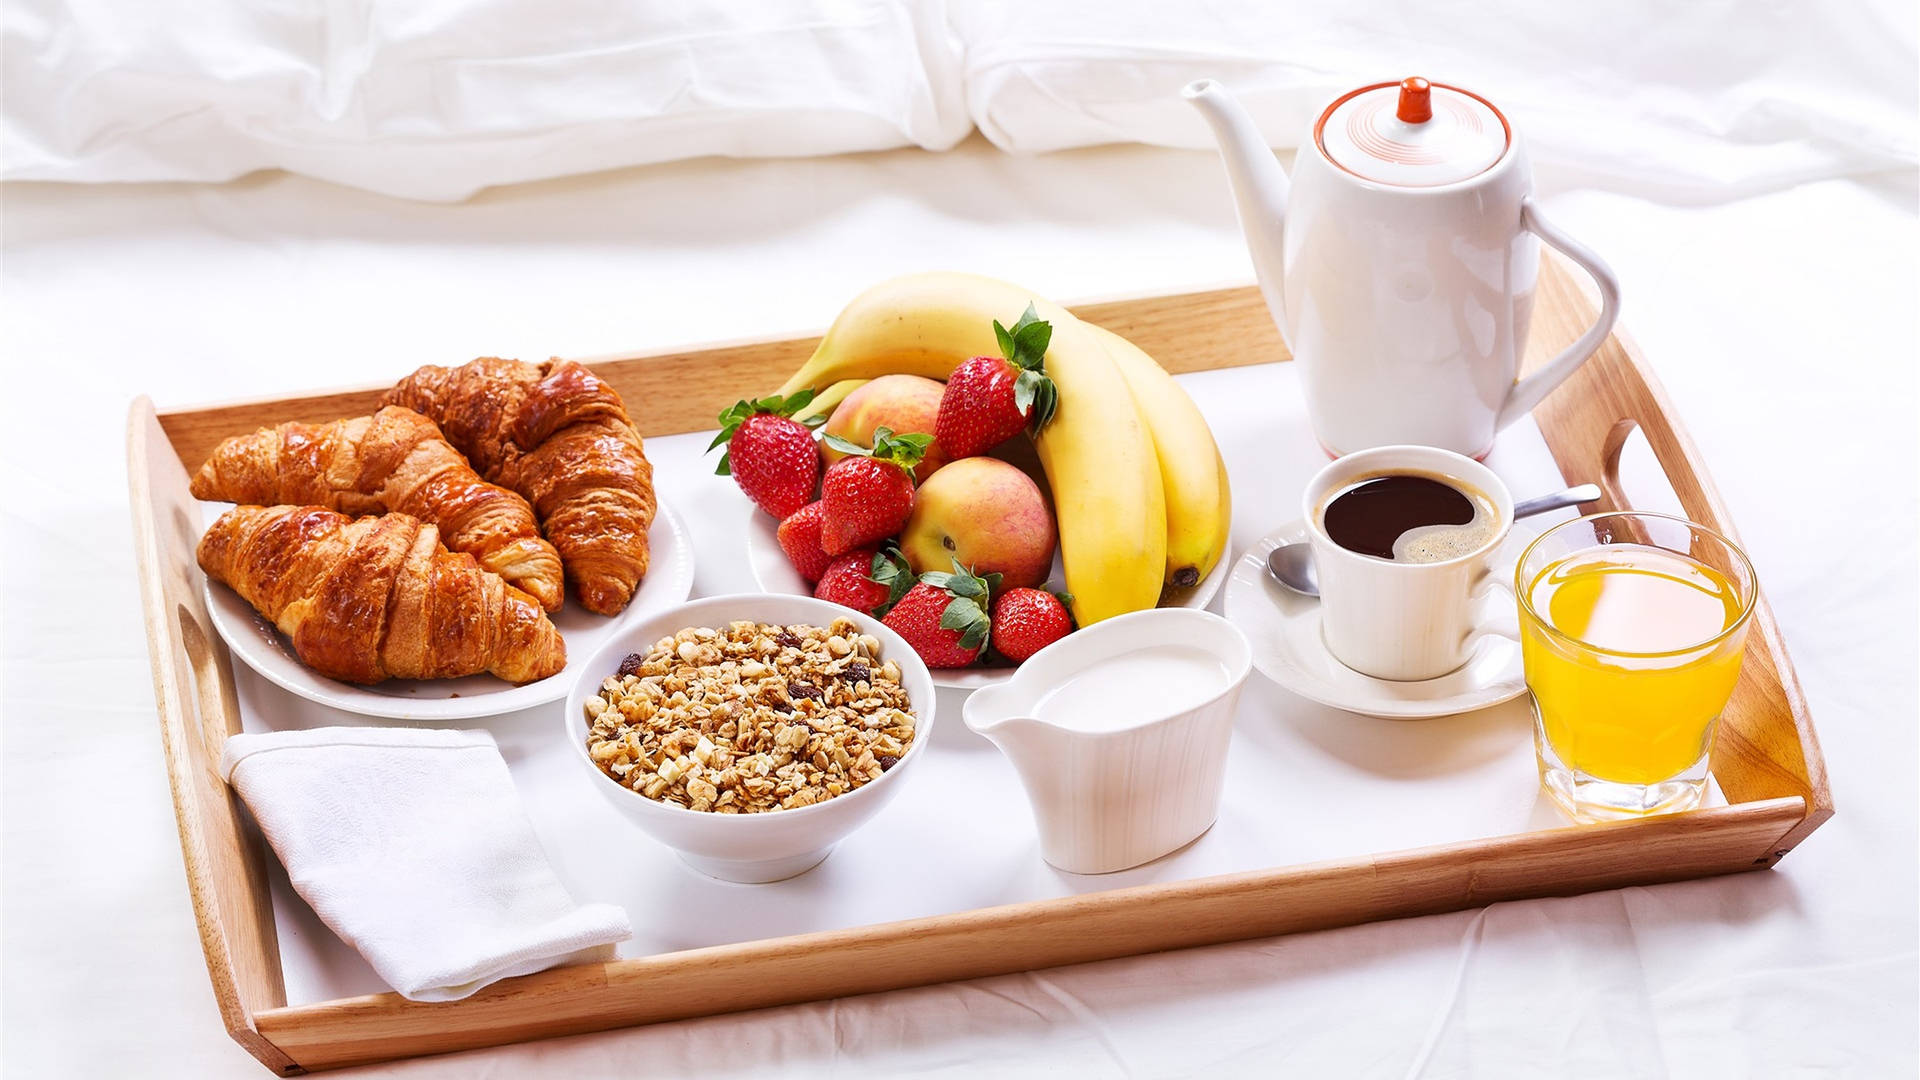 Healthy Breakfast Tray With Assortment Of Goodness Background